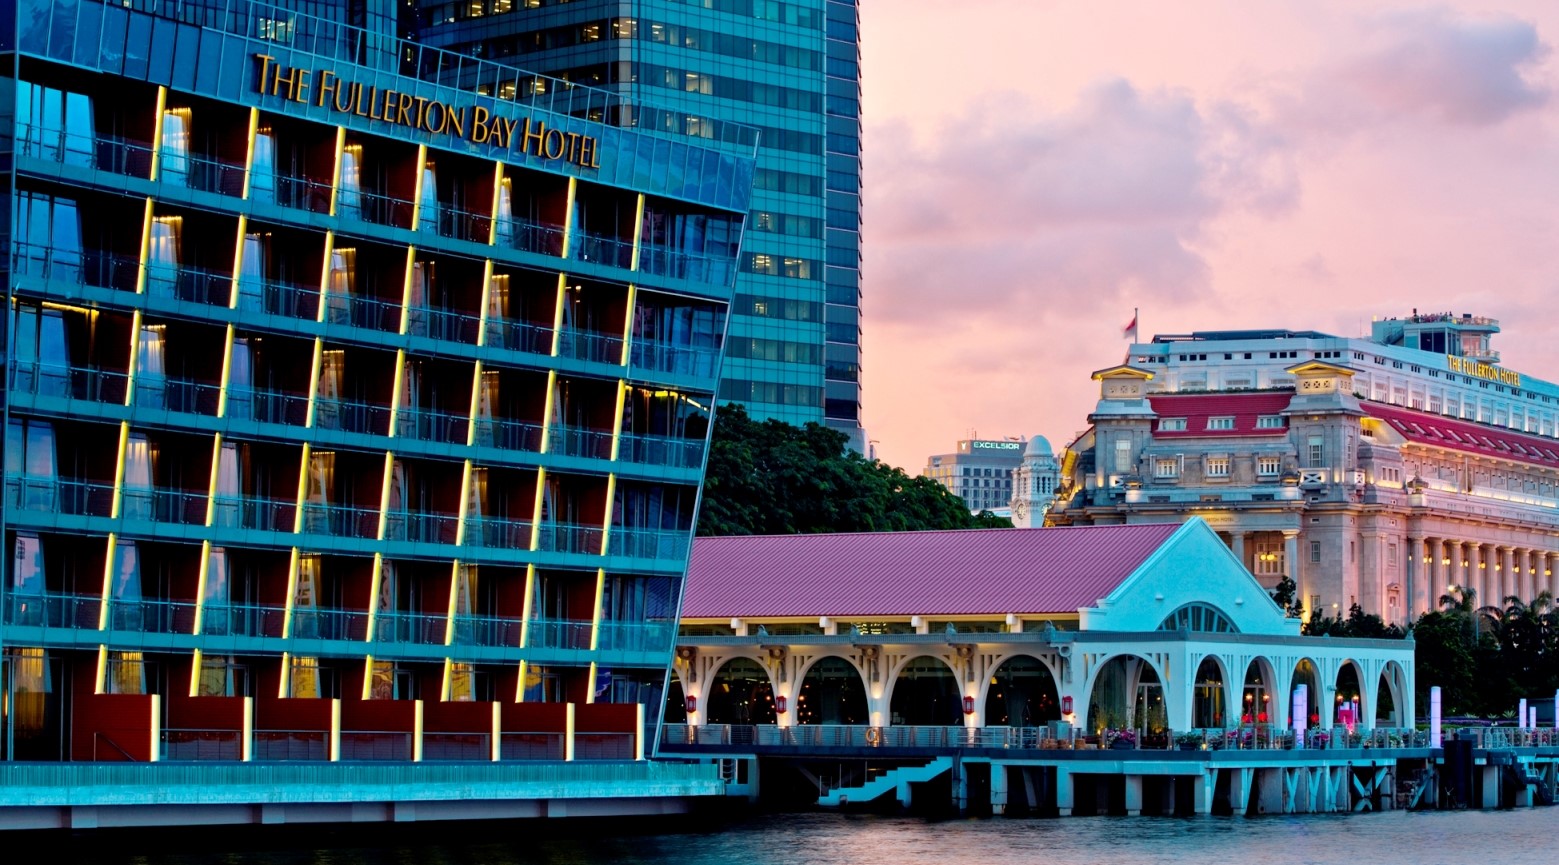 Waterfront-view-of-The-Fullerton-Bay-Hotel-Singapore - Crop